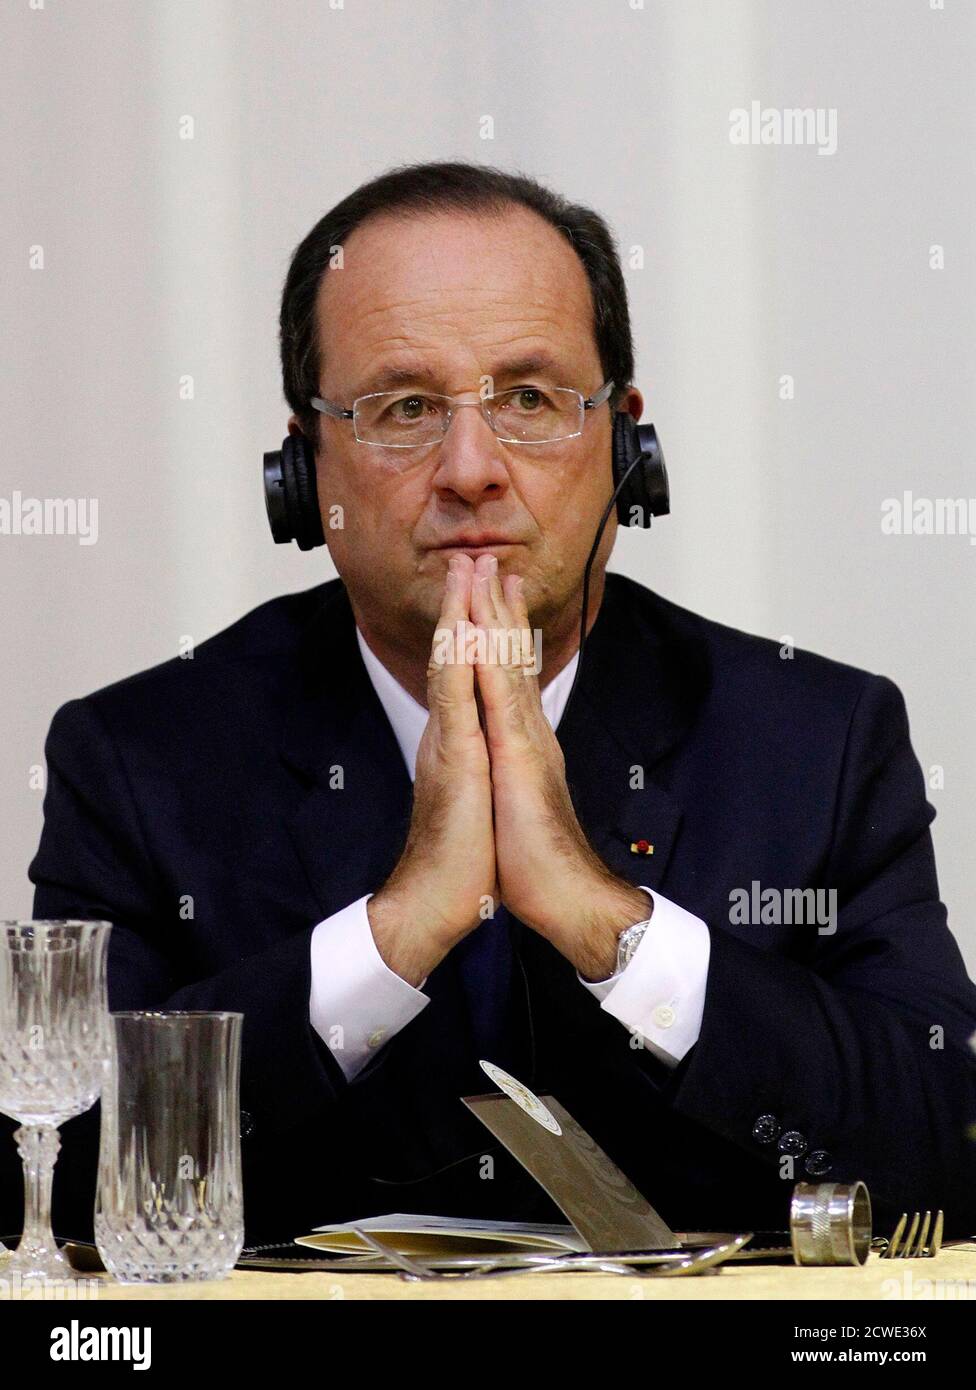 French President Francois Hollande listens ahead of a gala dinner at the State Guest House in Pretoria October 14, 2013. France will lend 100 million euros ($135 million) to South African state power utility Eskom to help it finance solar power projects in Africa's largest economy, according to a communique obtained by Reuters on Monday. The deal will be signed as a part of a summit between Hollande and South Africa's President Jacob Zuma, which started on Monday in Pretoria. REUTERS/Siphiwe Sibeko (SOUTH AFRICA - Tags: POLITICS ENERGY BUSINESS) Stock Photo